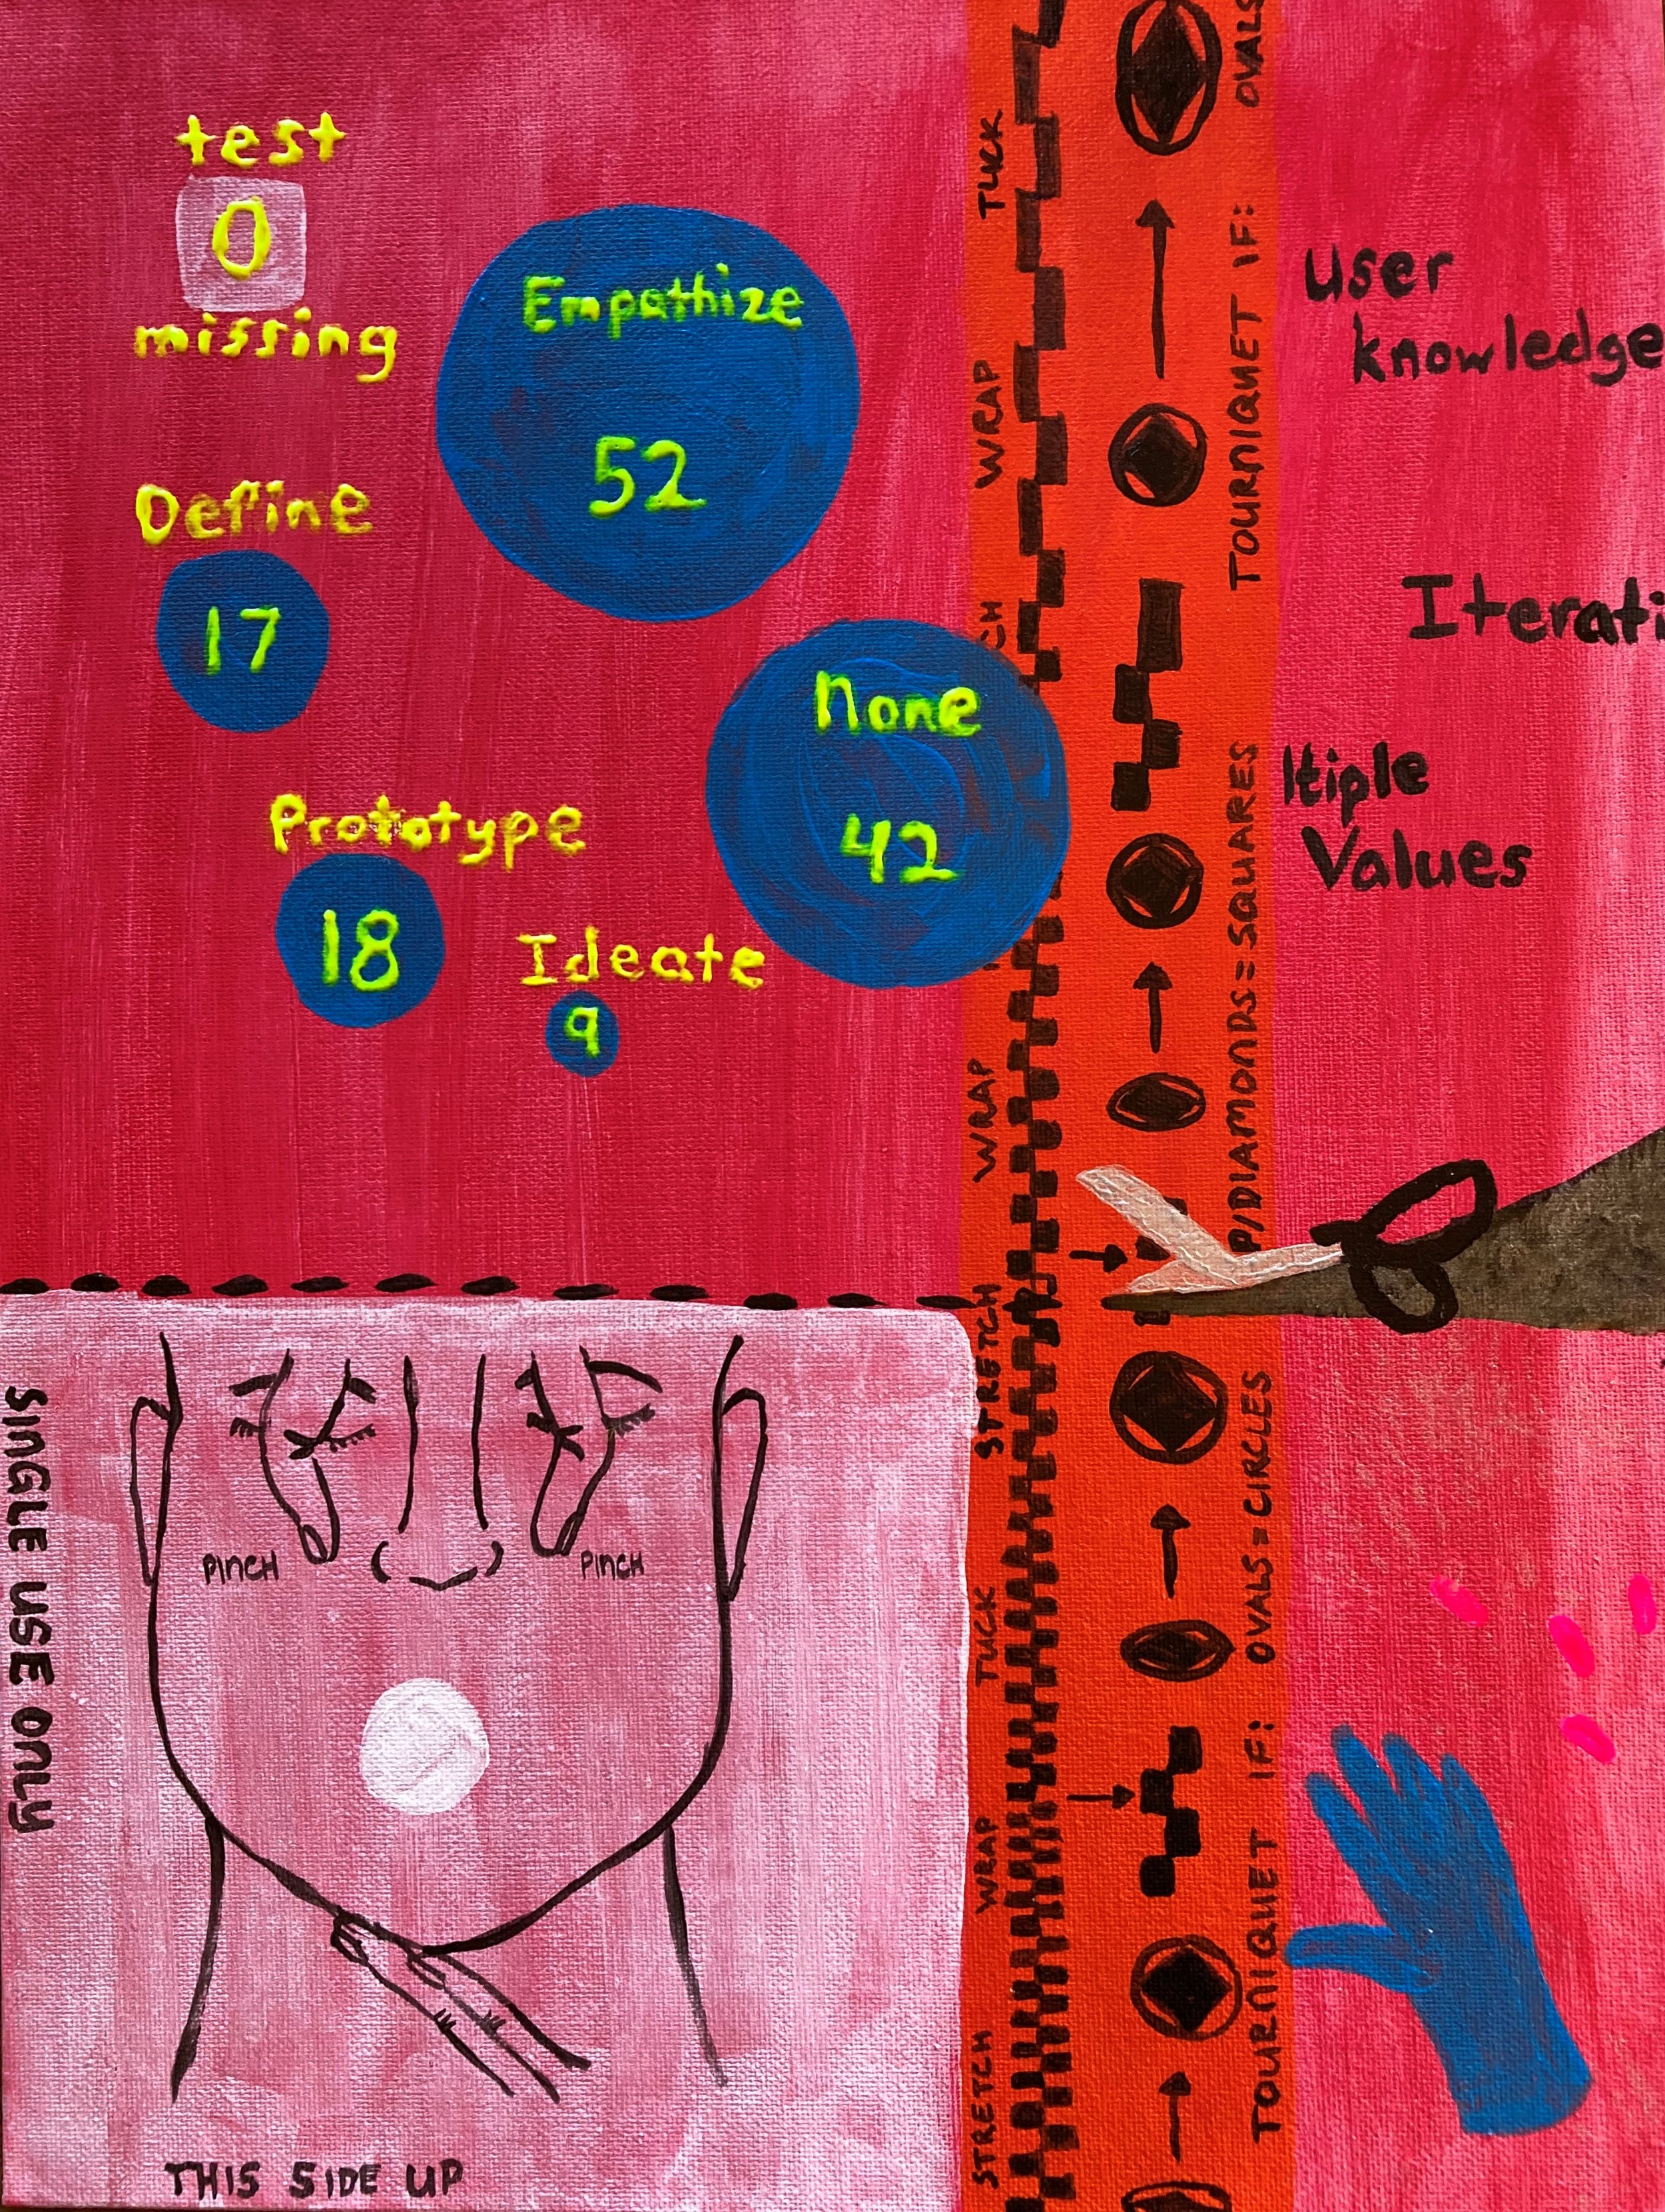  A painting of a collage of materials found in first aid kits on a red background, with yellow bubbles denoting multiple steps in a design process.  